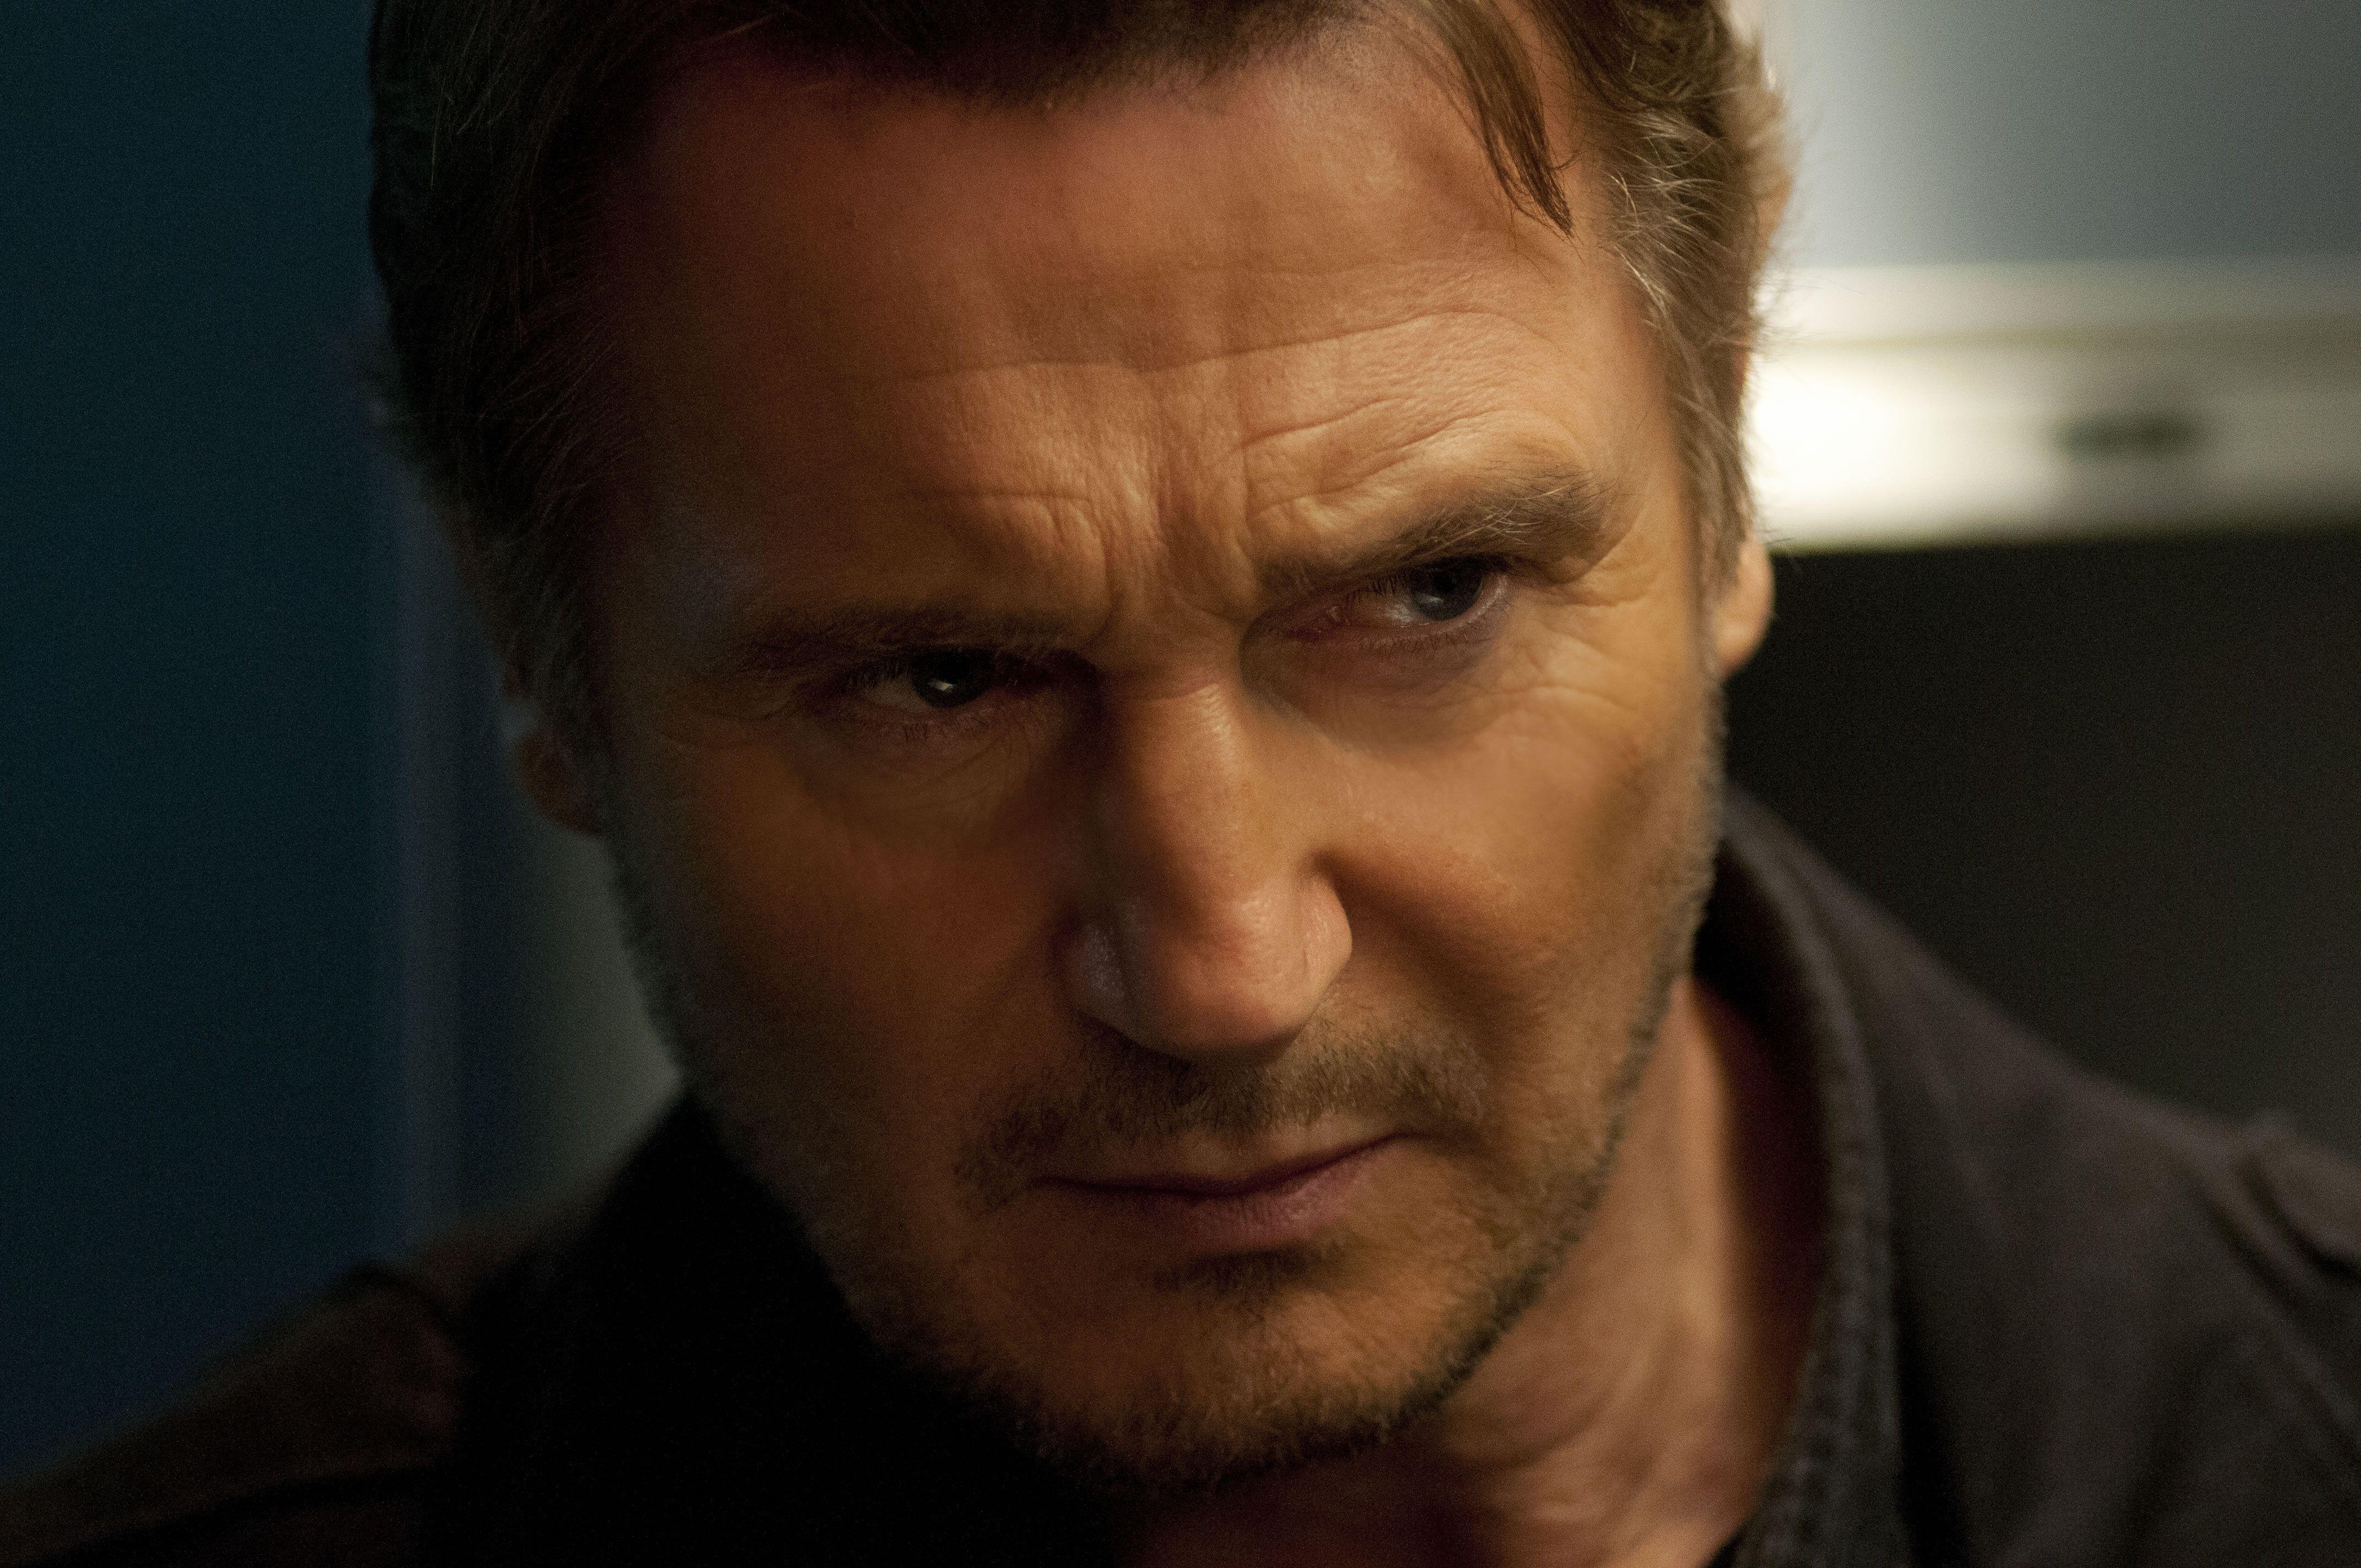 Liam Neeson Wallpapers High Quality